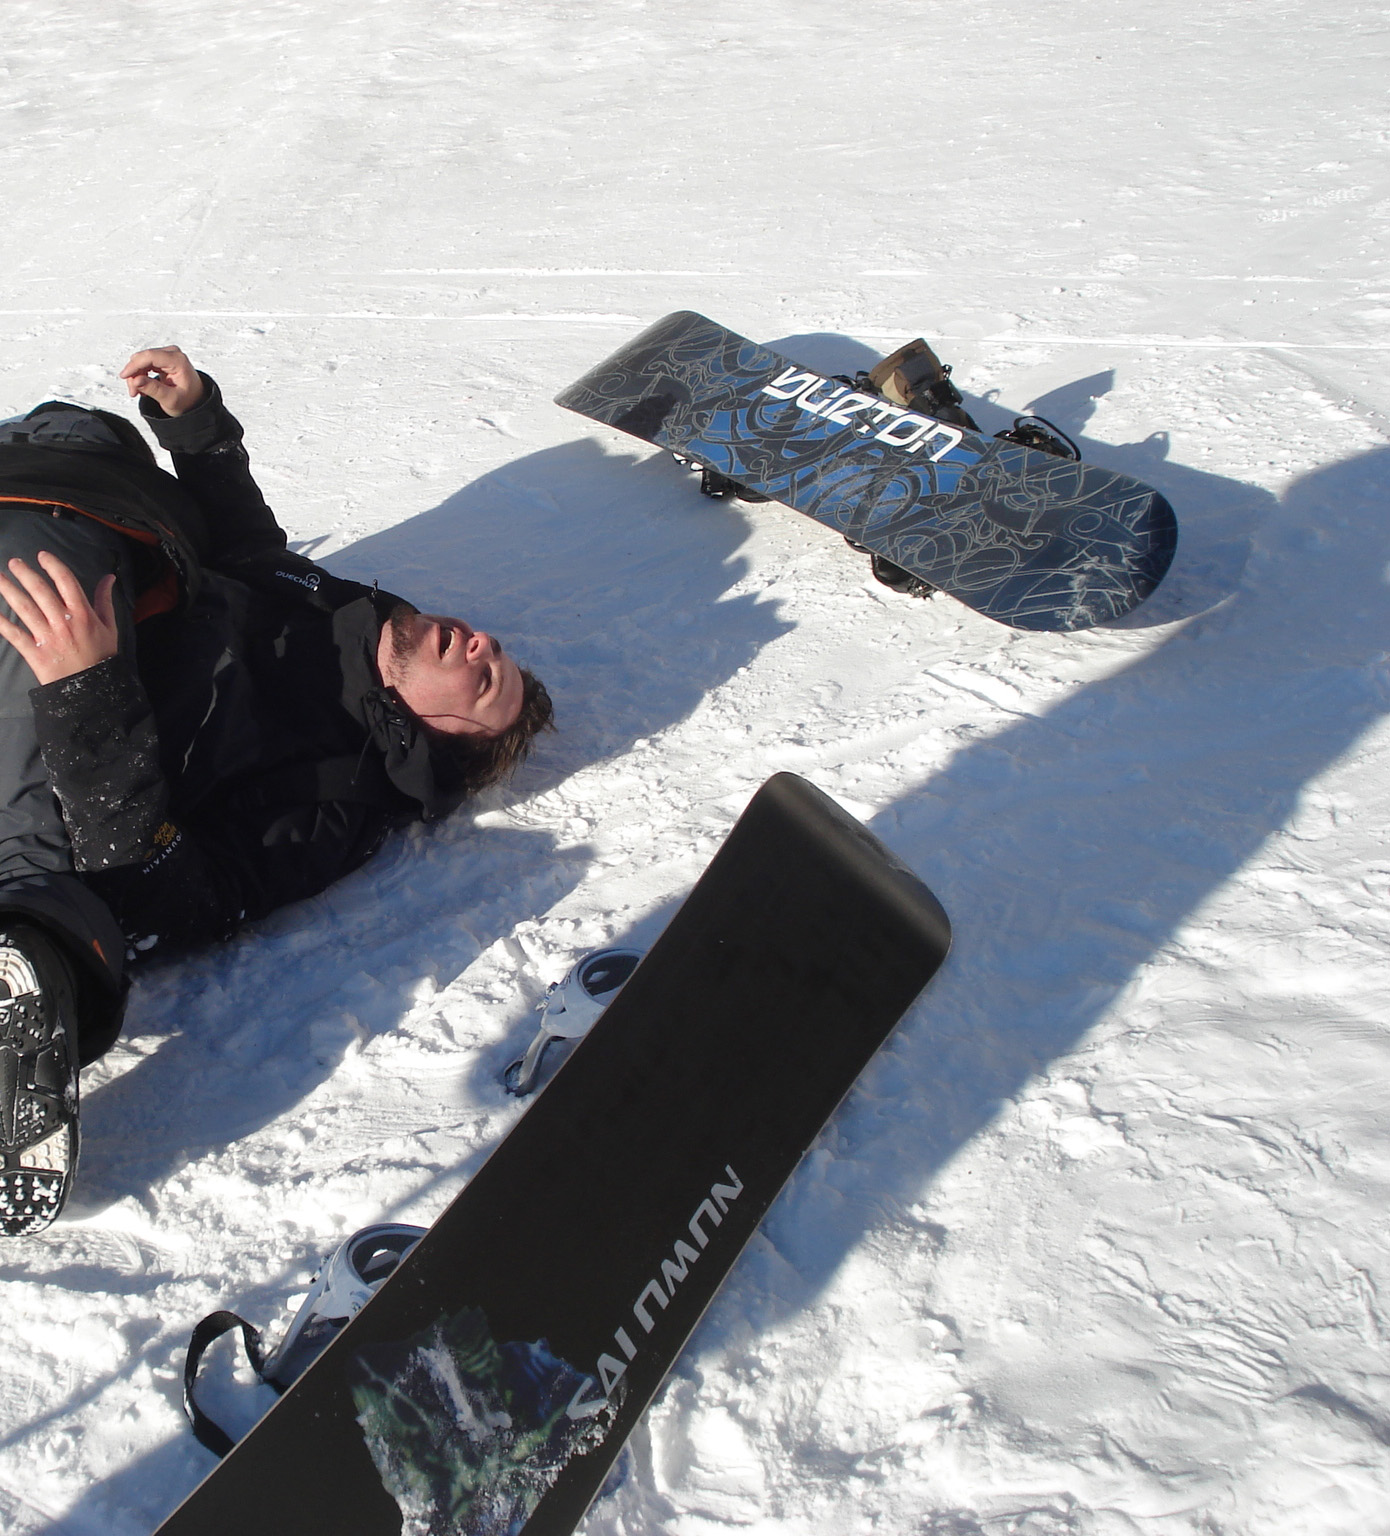 man on snowboard laying in the snow with his feet up